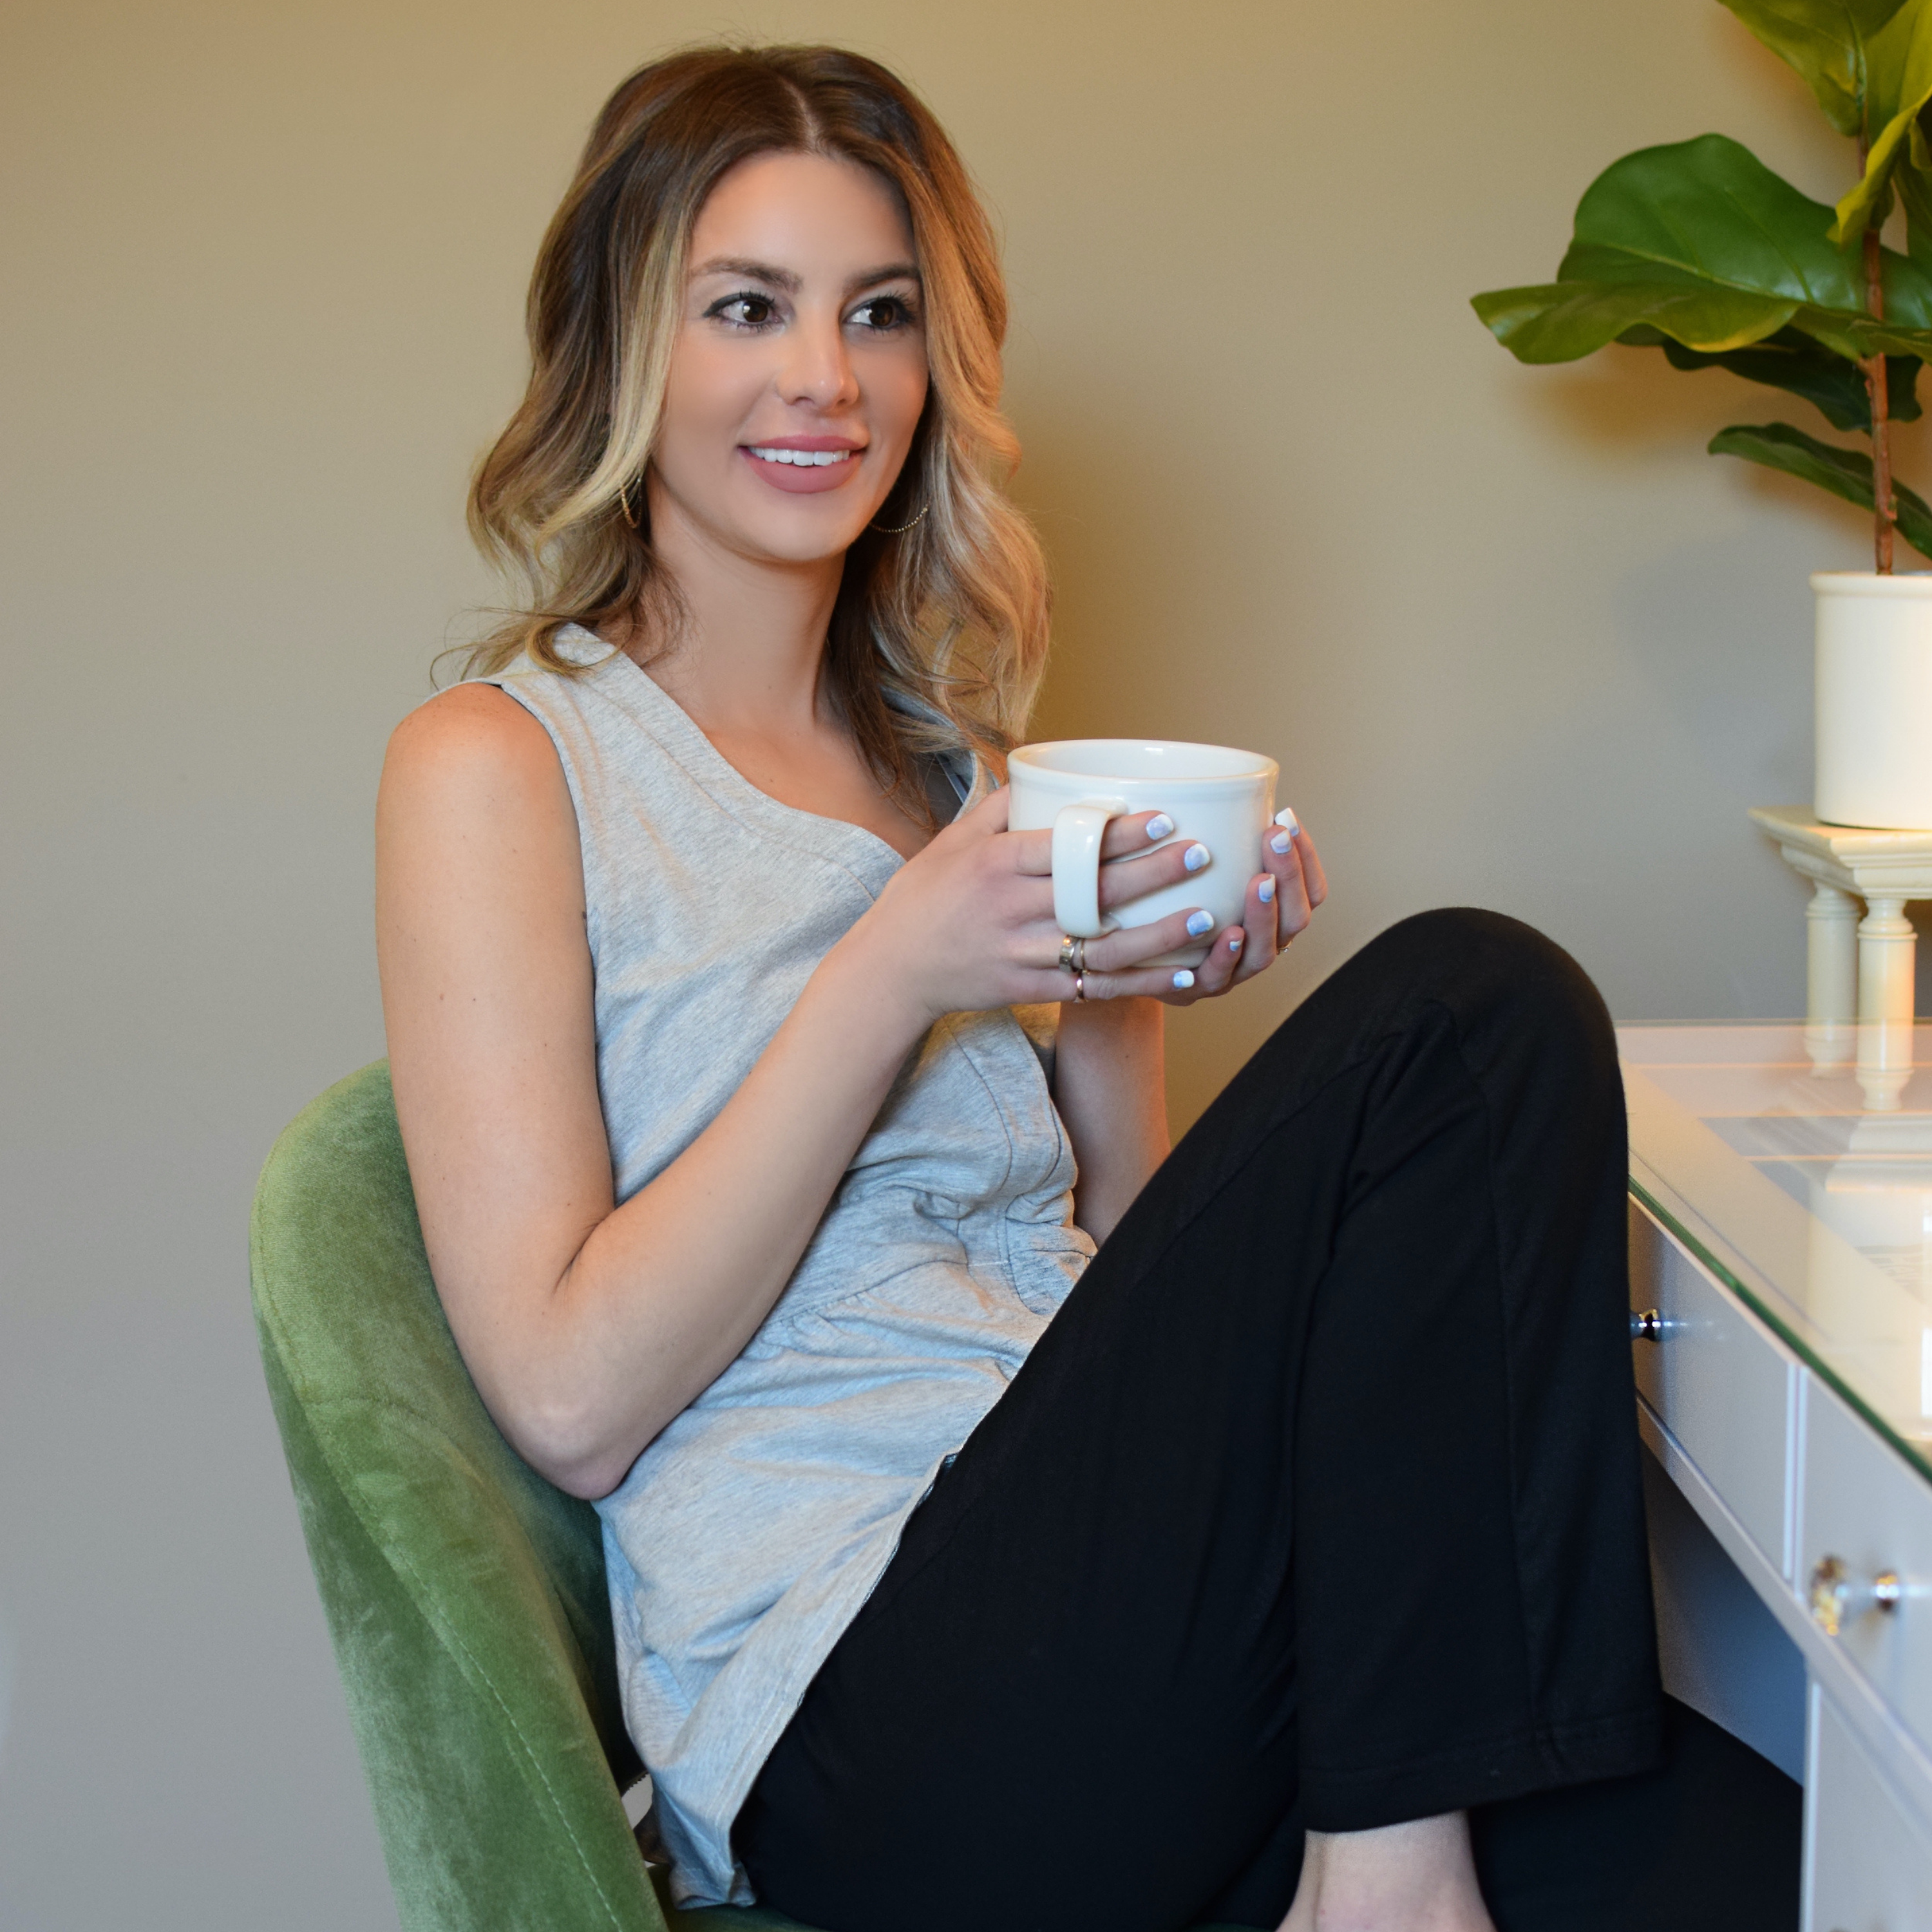 Woman lounging wearing a grey mastectomy top and black elastic waist pants, holding a cup of coffee.